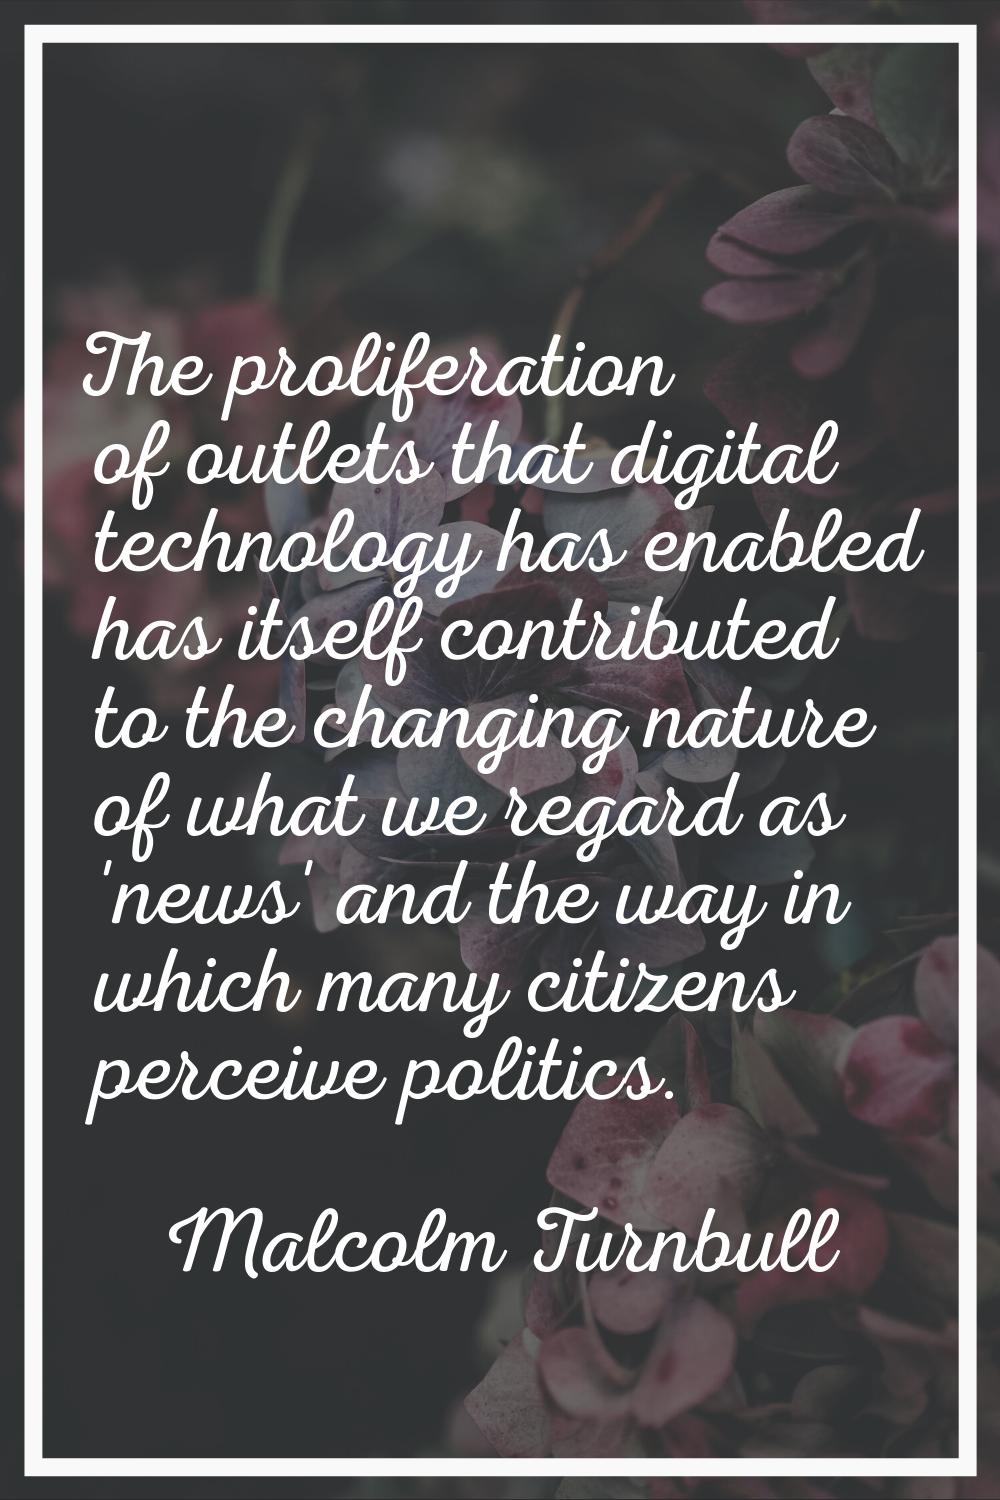 The proliferation of outlets that digital technology has enabled has itself contributed to the chan